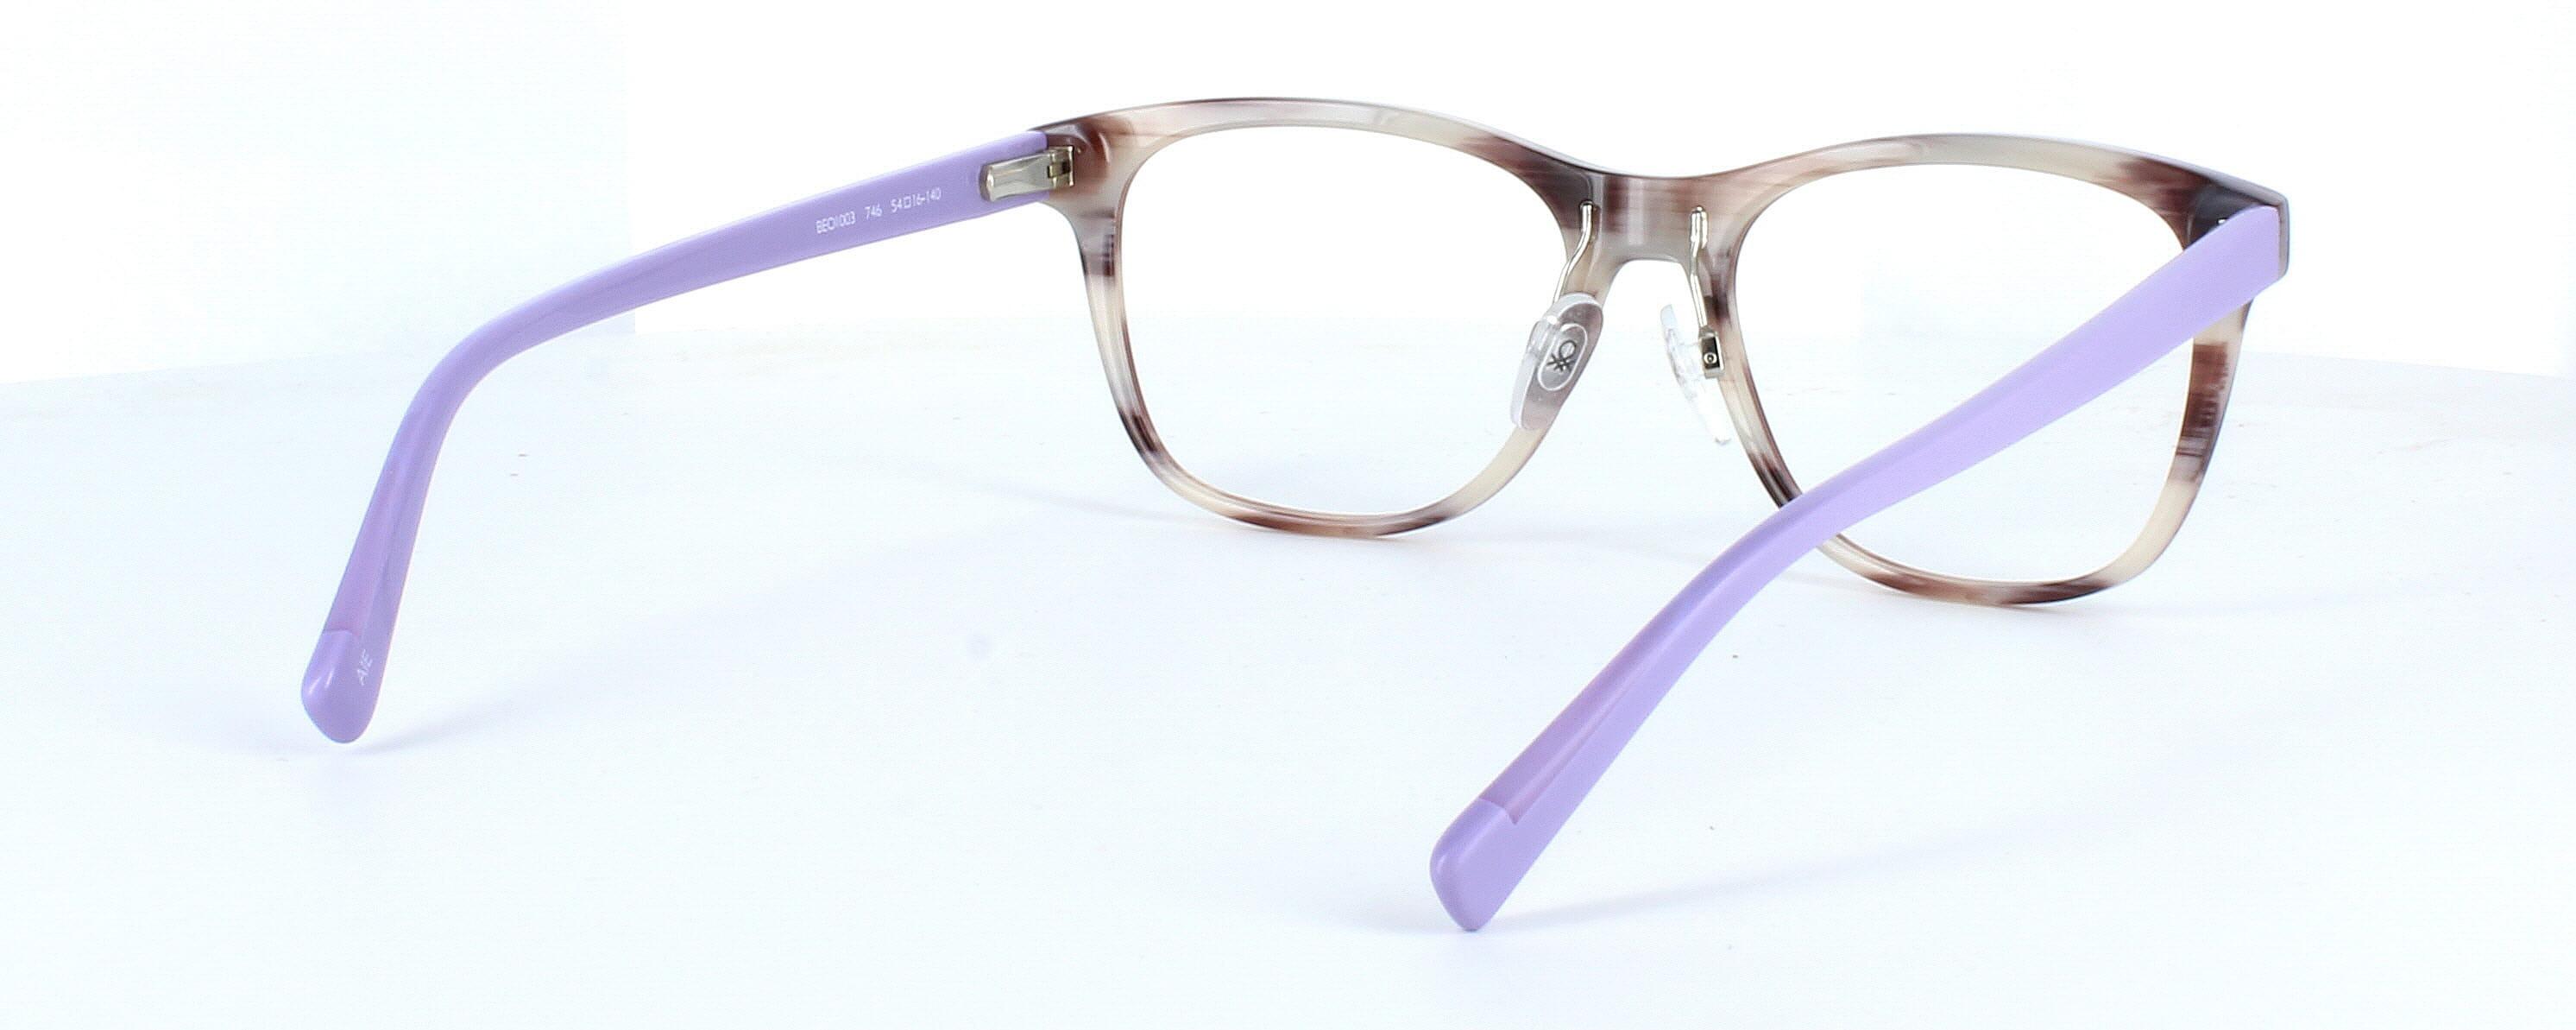 Benetton BEO1003 746 - Women's hand made acetate with light coloured tortoise front face and mauve-coloured arms - image view 4